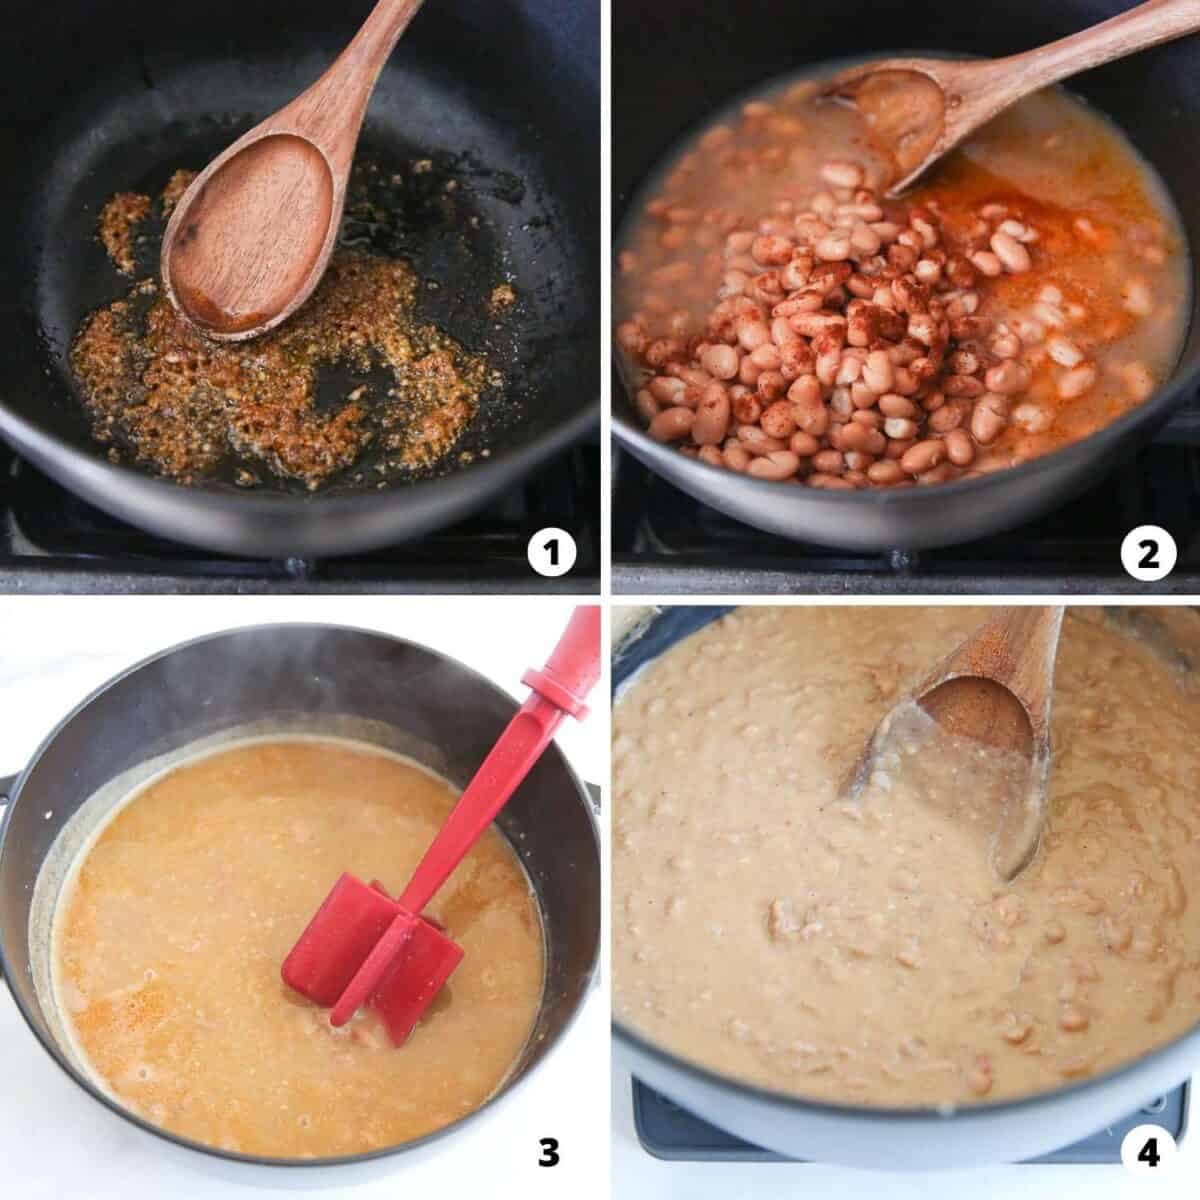 Step by step collage showing how to make refried beans.